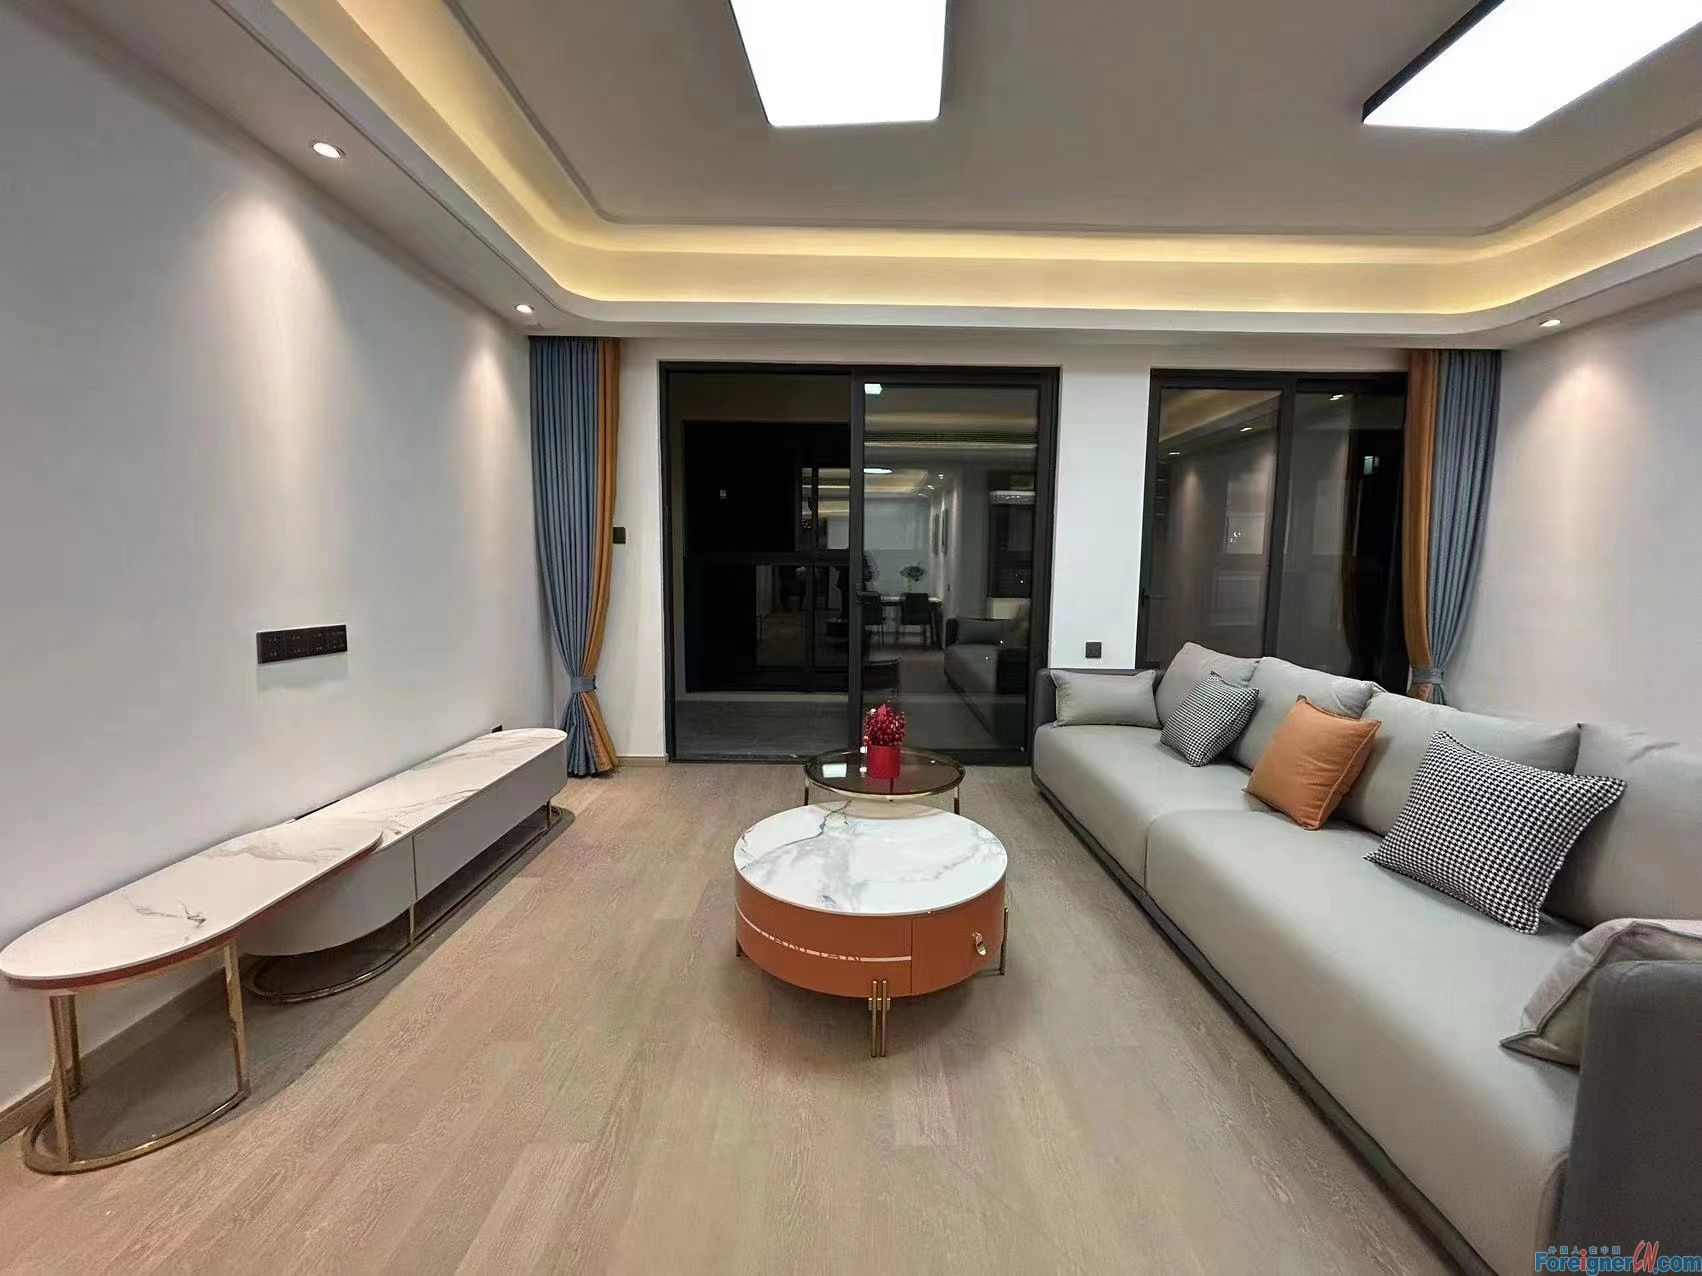  High Value!! Midea Cloud Mansion Apartment to rent/ in Xiang Cheng district/3 bedrooms and 2 bathrooms/Central AC and Floor heating/Brand new/Wuyue shopping mall